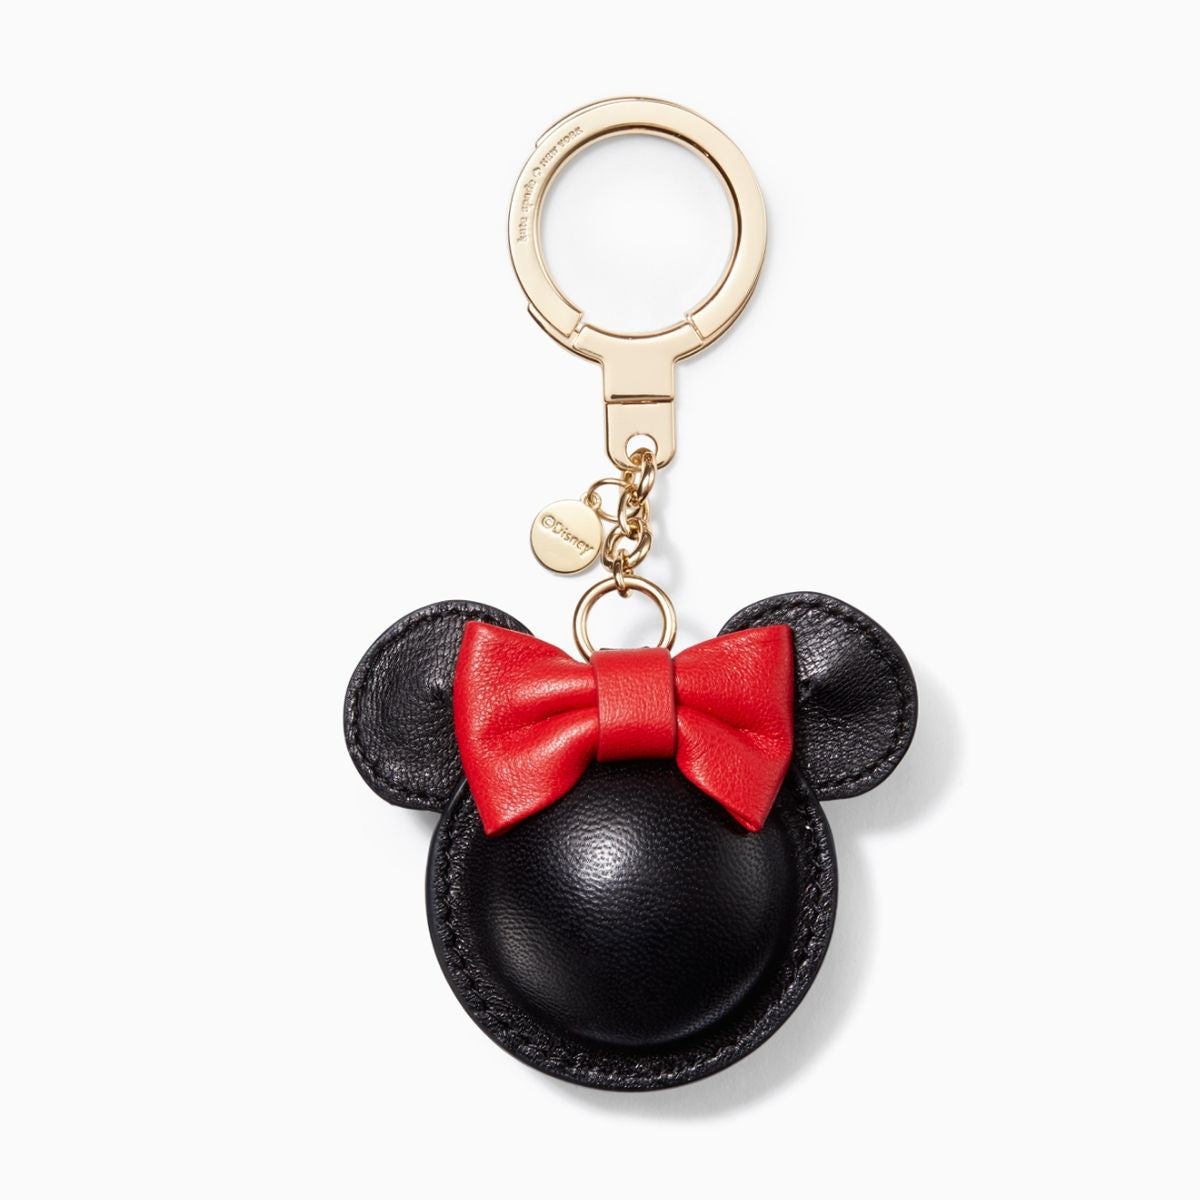 Mickey Minnie Mouse Keychains, Keychains Minni Mouse